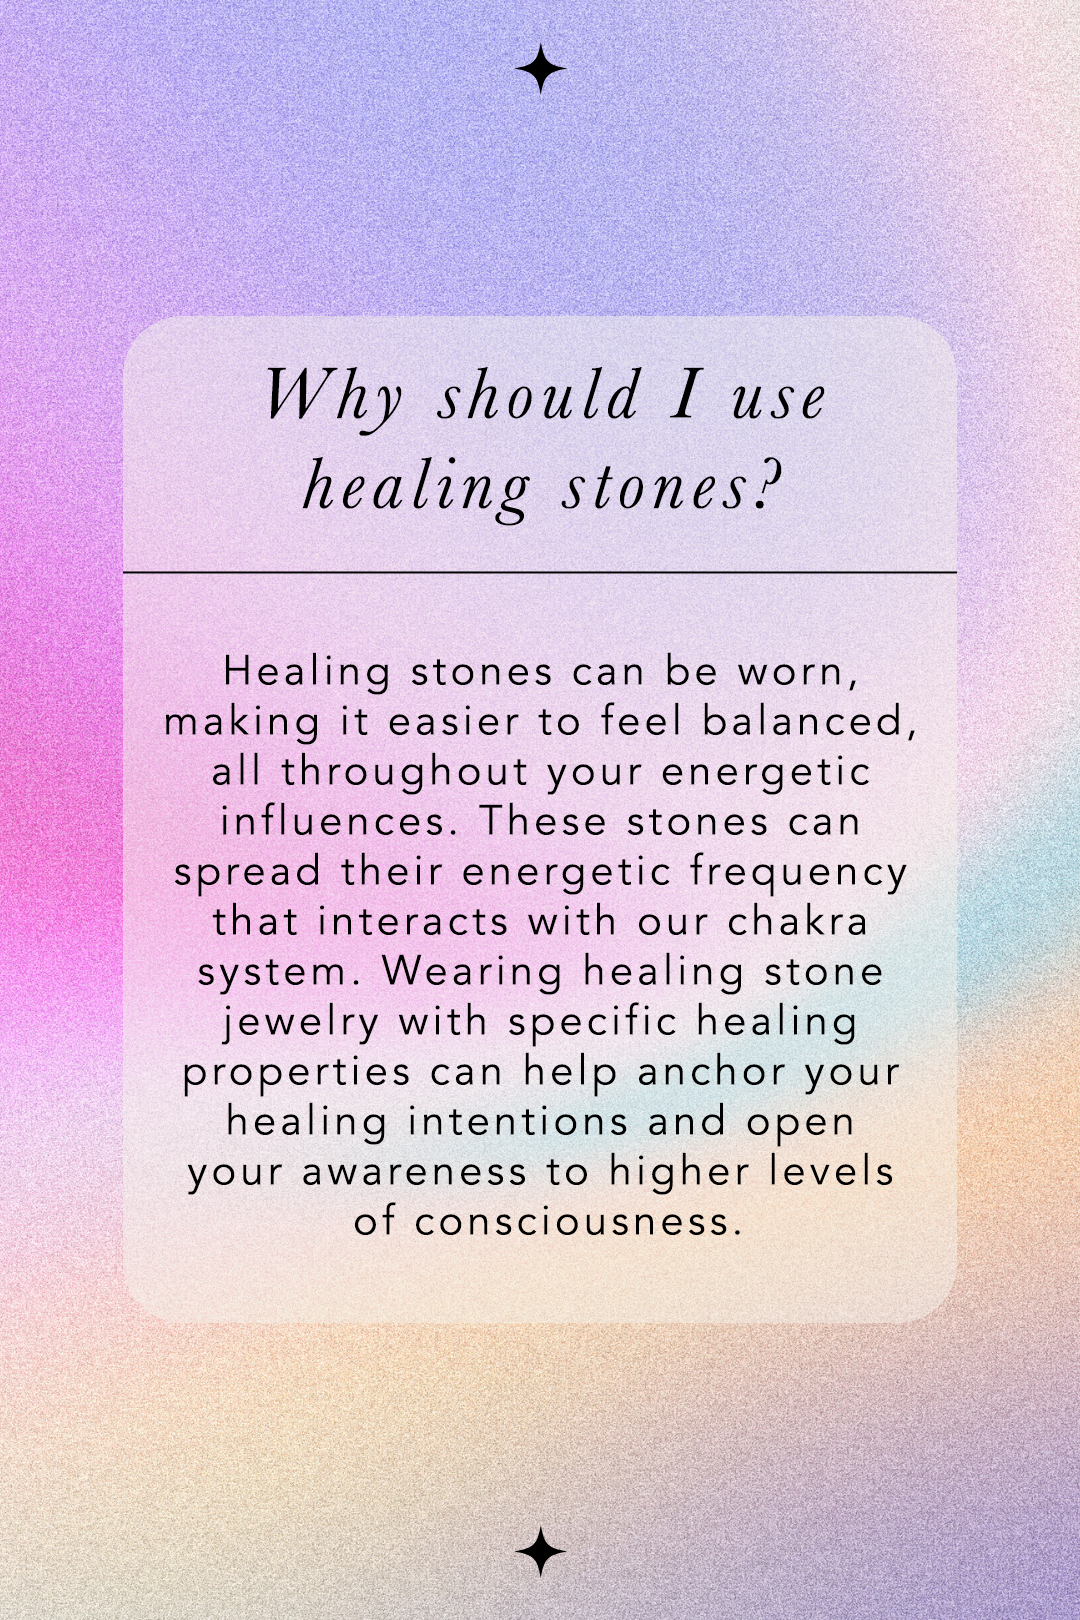 Why Should I use healing stones? Healing stones can be worn, making it easier to feel balanced, all throughout your energetic influences. These stones can spread their energetic frequency that interacts with our chakra system. Wearing healing stone jewelry with specific healing properties can help anchor your healing intentions and open your awareness to higher levels of consciousness.